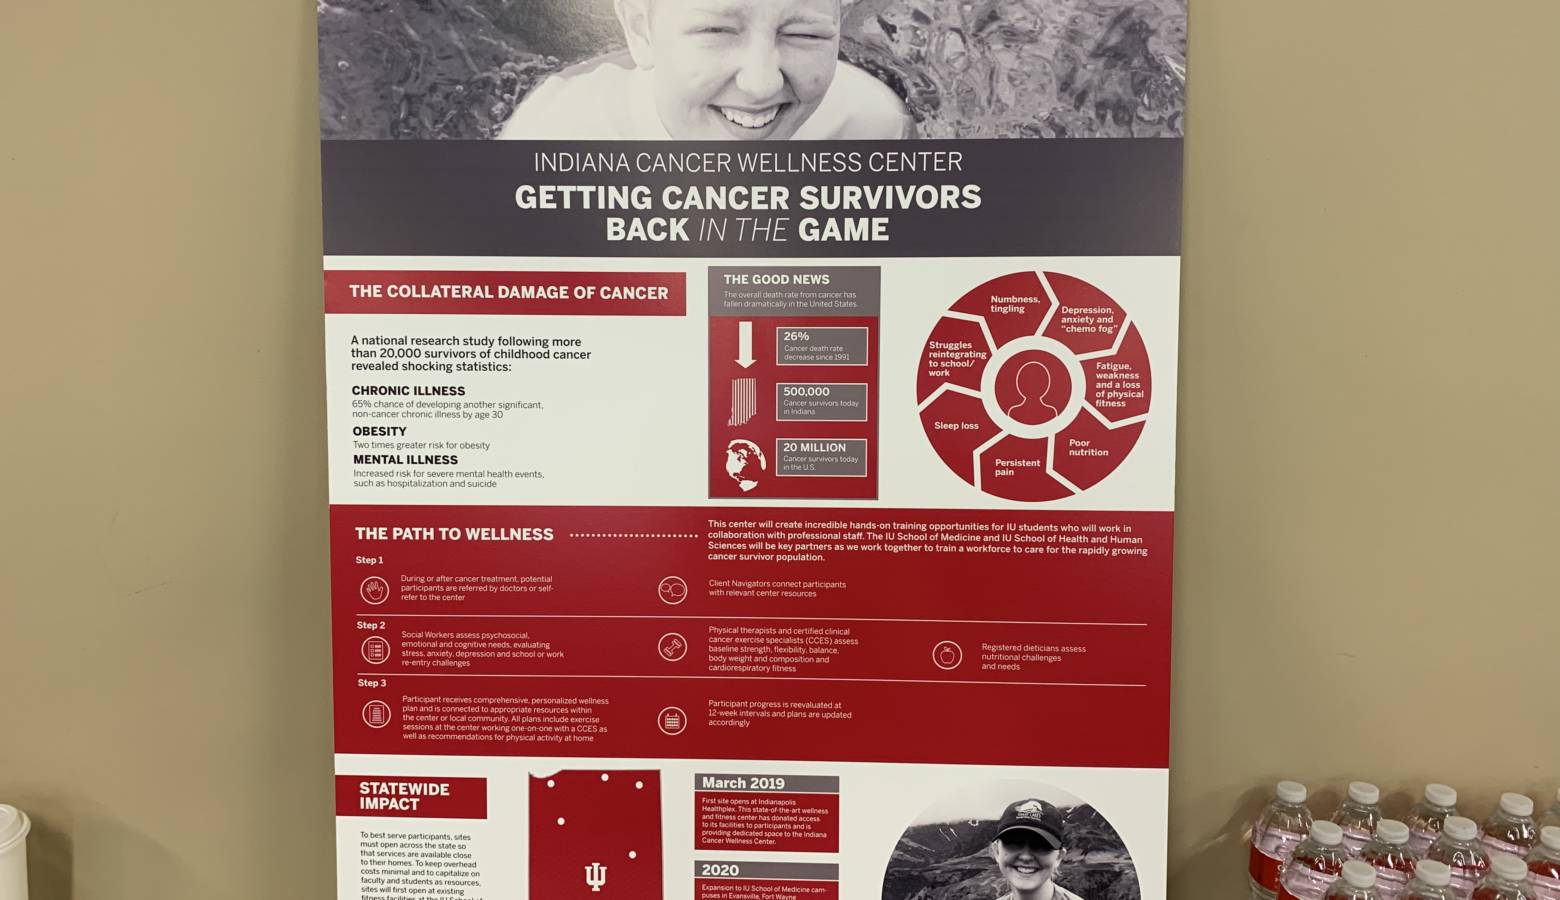 A poster is displayed at the new cancer wellness center launch in Indianapolis. (Jill Sheridan/IPB News)